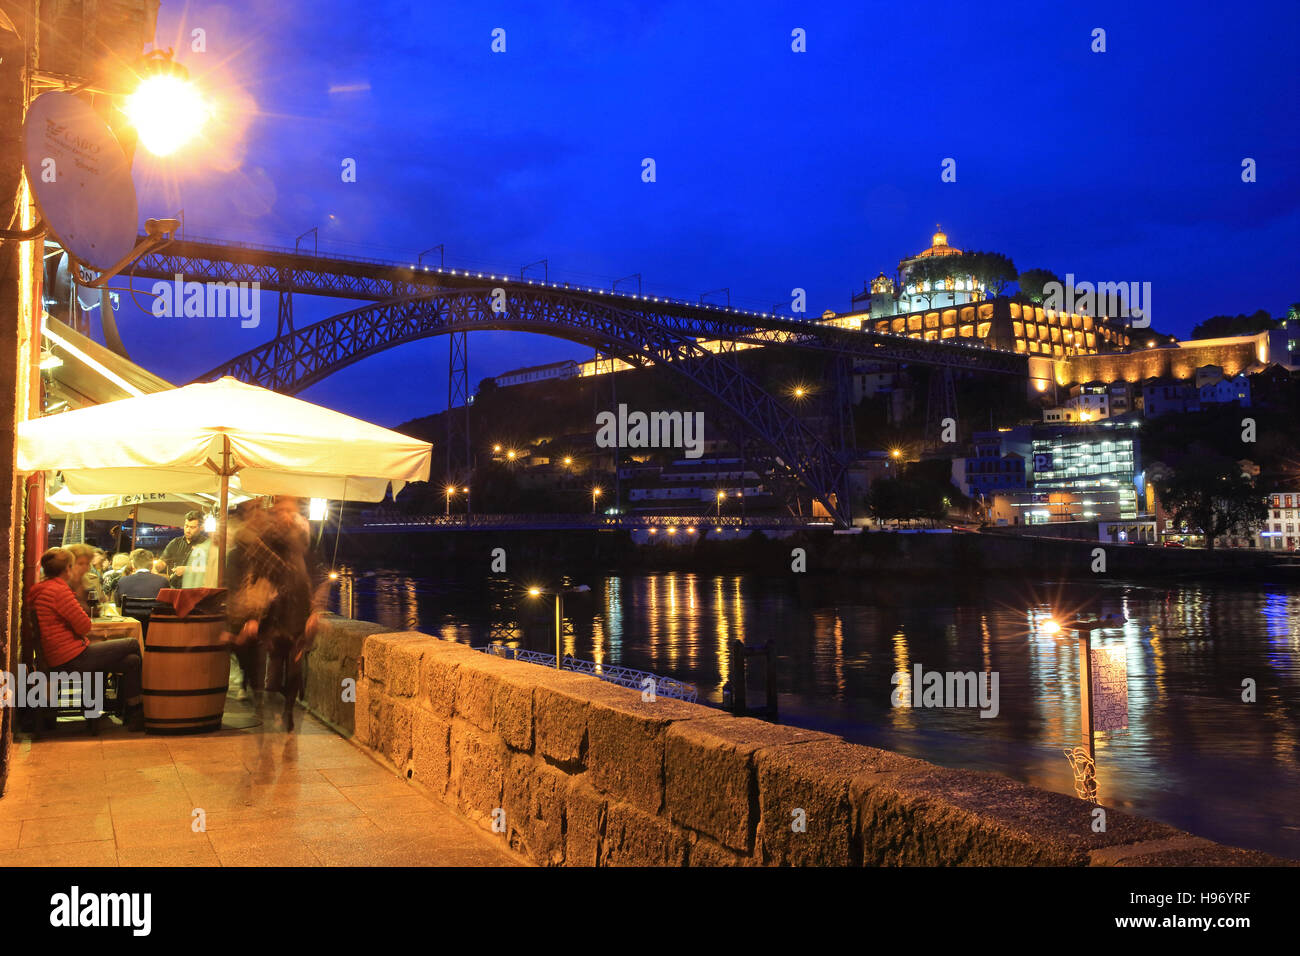 A restaurant on the waterfront of the River Douro, at dusk, with the Dom Luis 1 bridge behind, in Porto, north Portugal, Europe Stock Photo